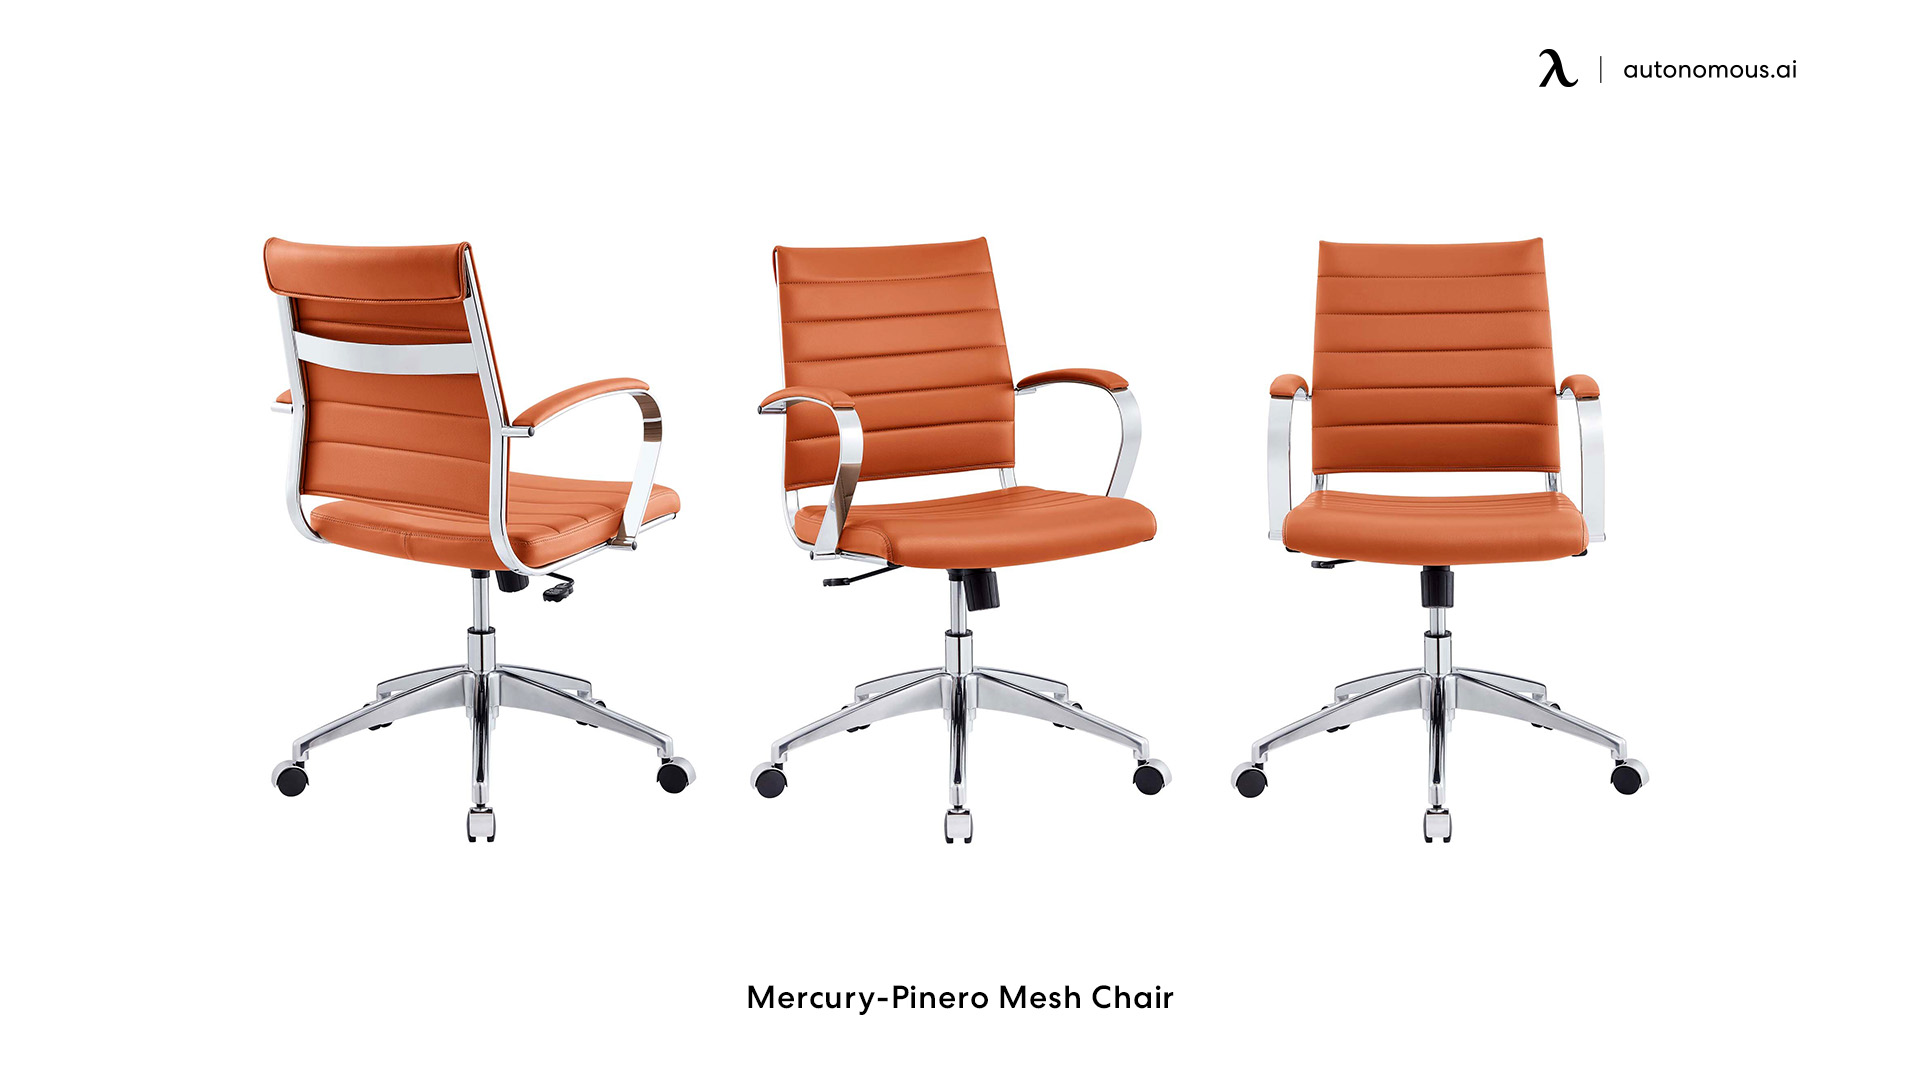 Mercury-Pinero office chair with adjustable arms